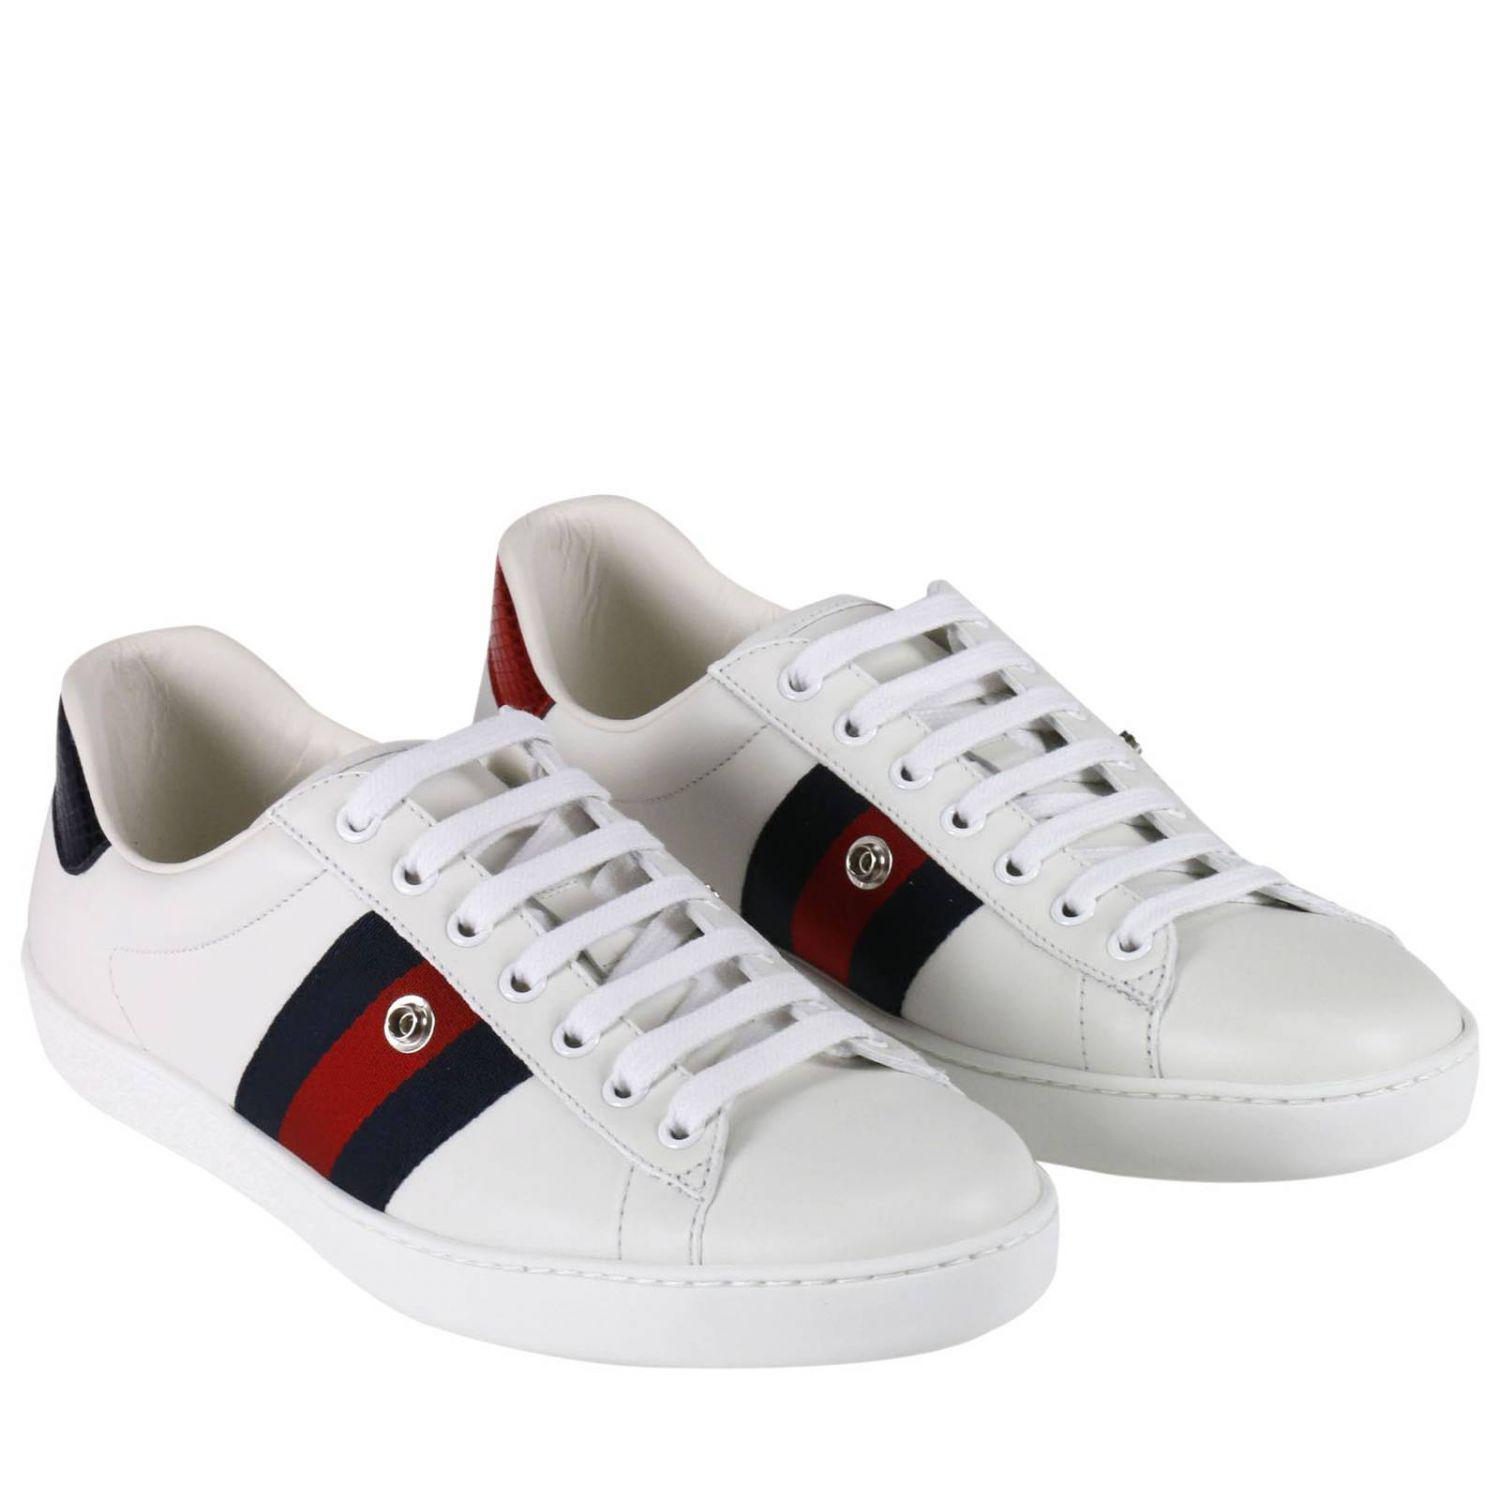 Gucci UFO Embroidered Leather Shoe Patch - White Other, Accessories -  GUC218013